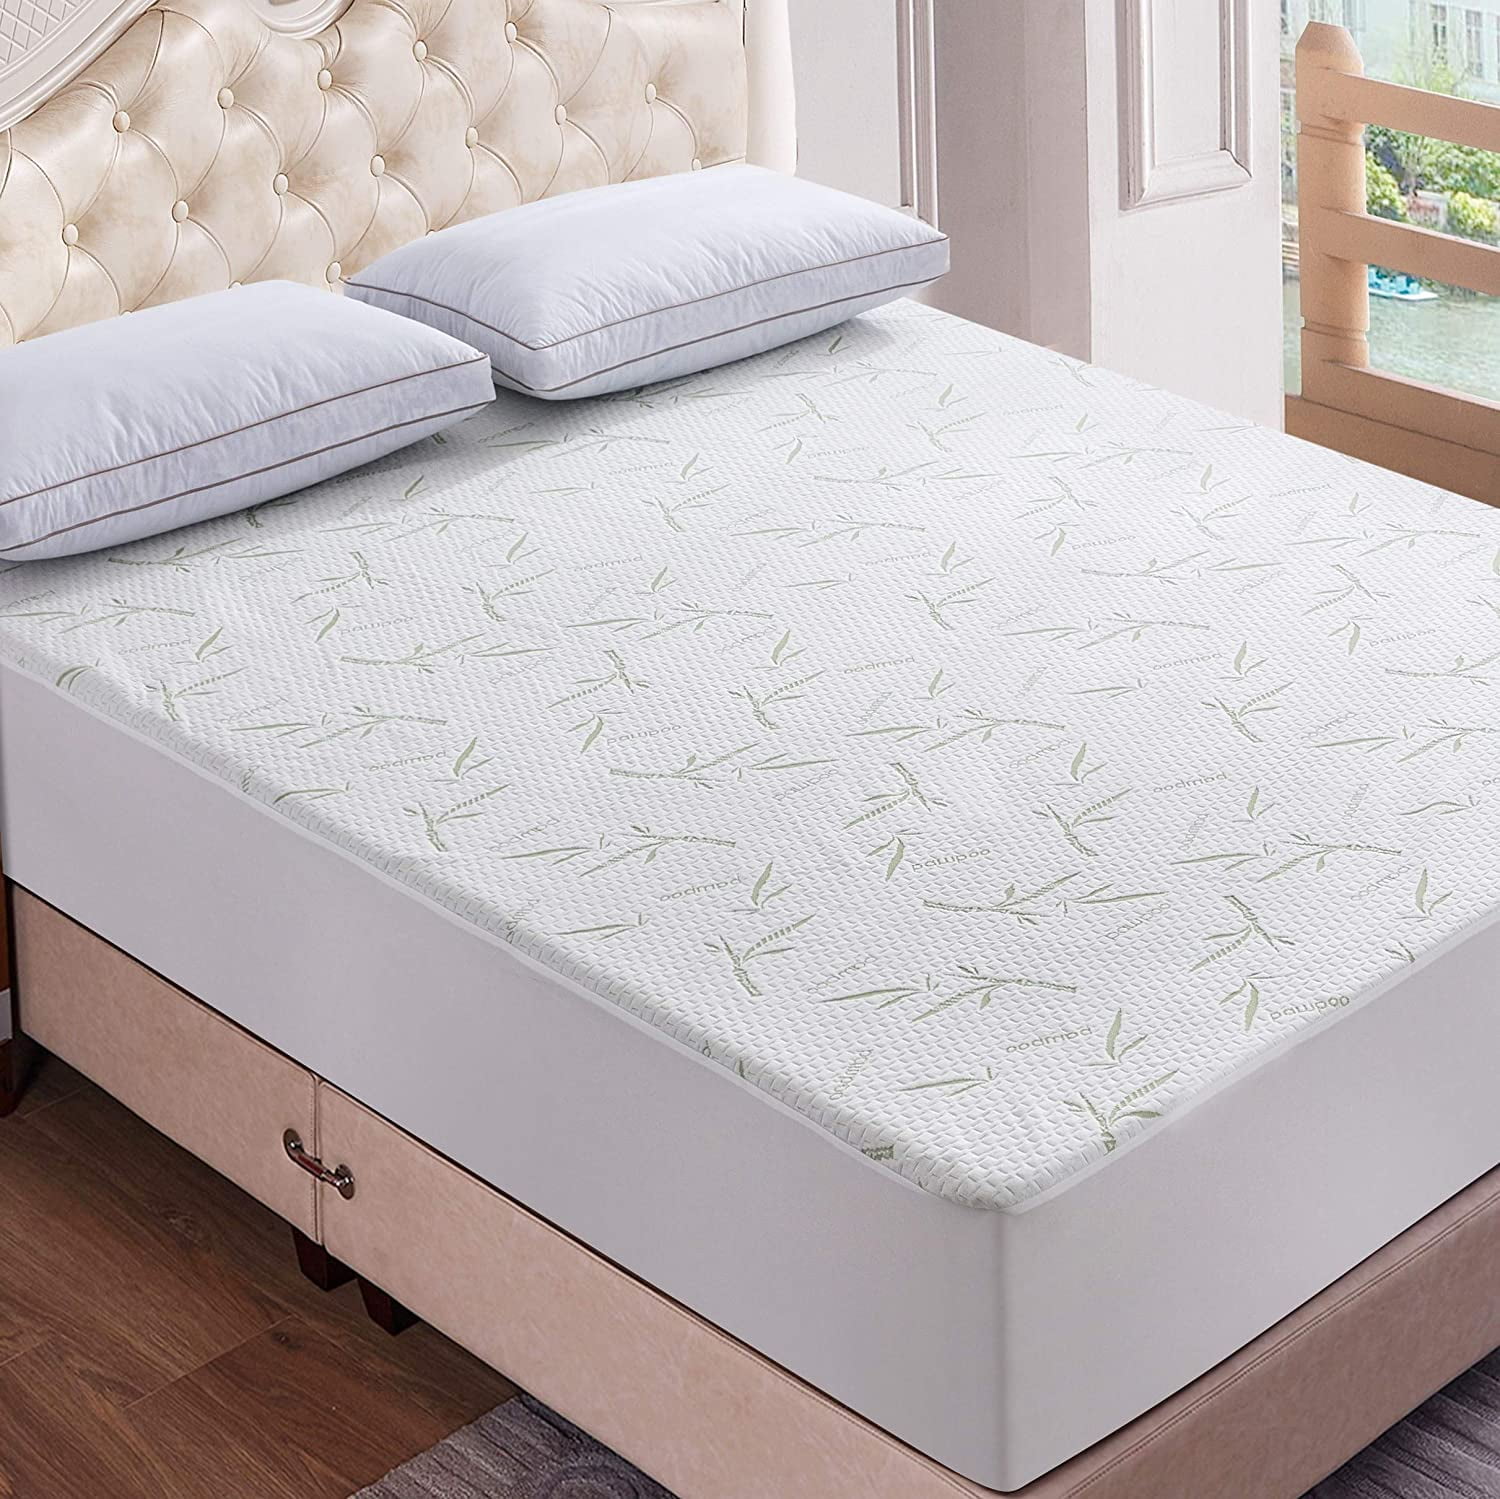 Hypoallergenic Waterproof Deep Fitted Breathable Deep Fitted King Mattress  Pads Bamboo-MattressPad-King - The Home Depot